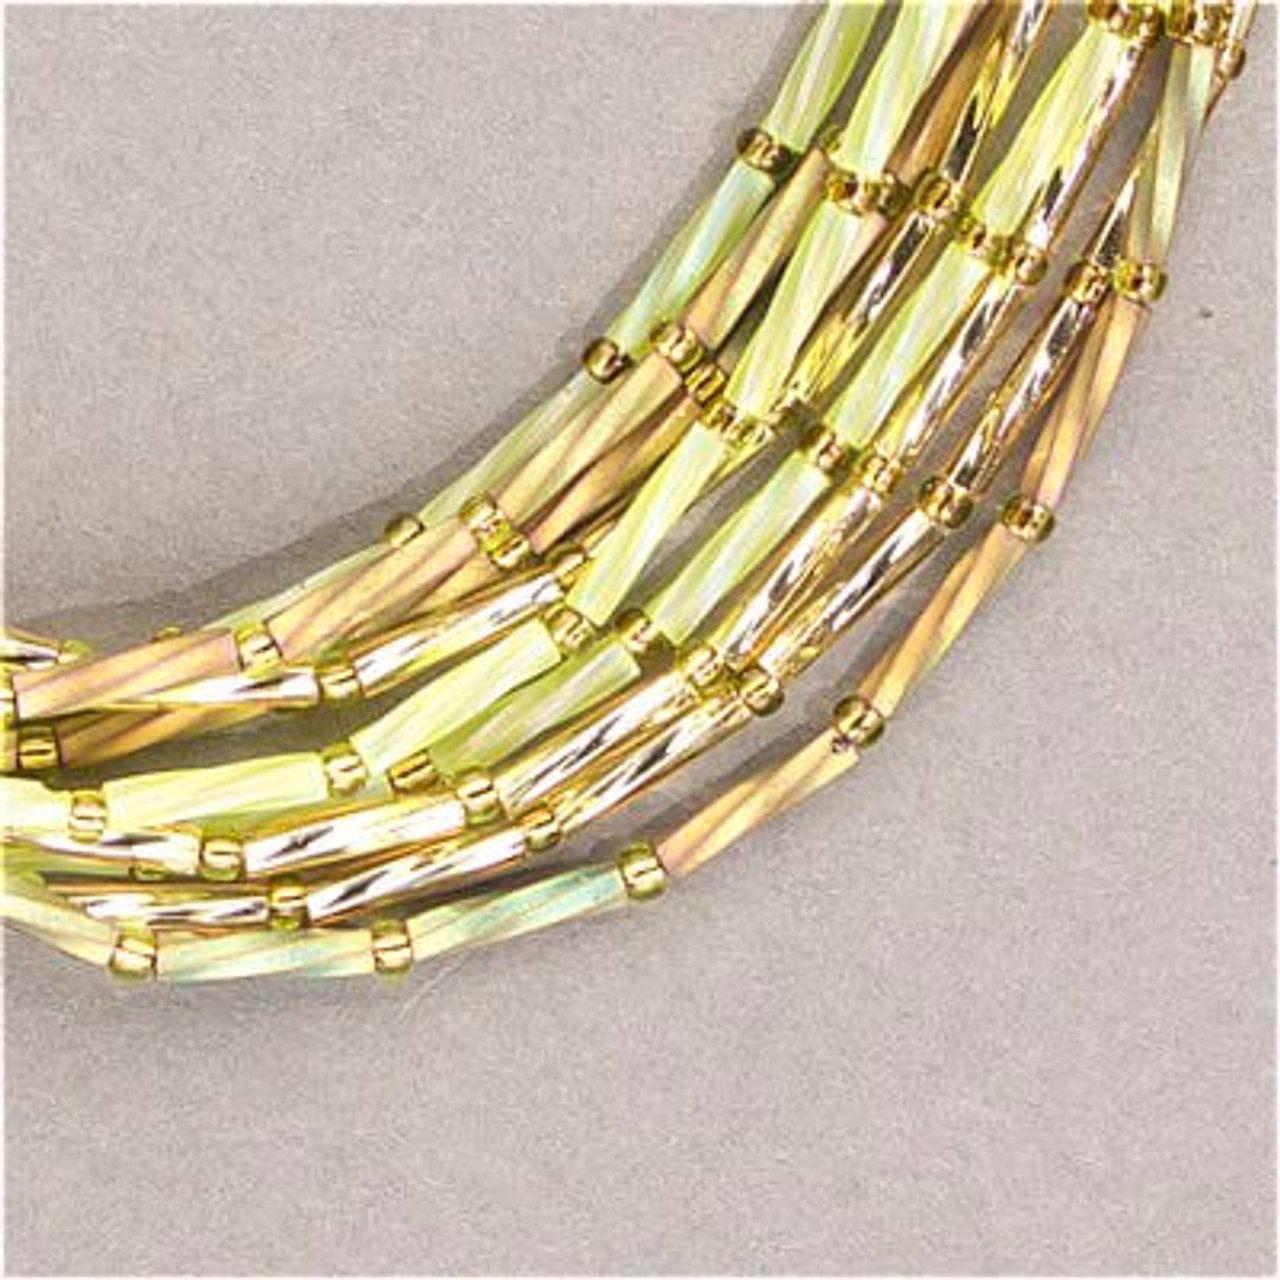 20g, 7mm bugle beads, silver-lined gold